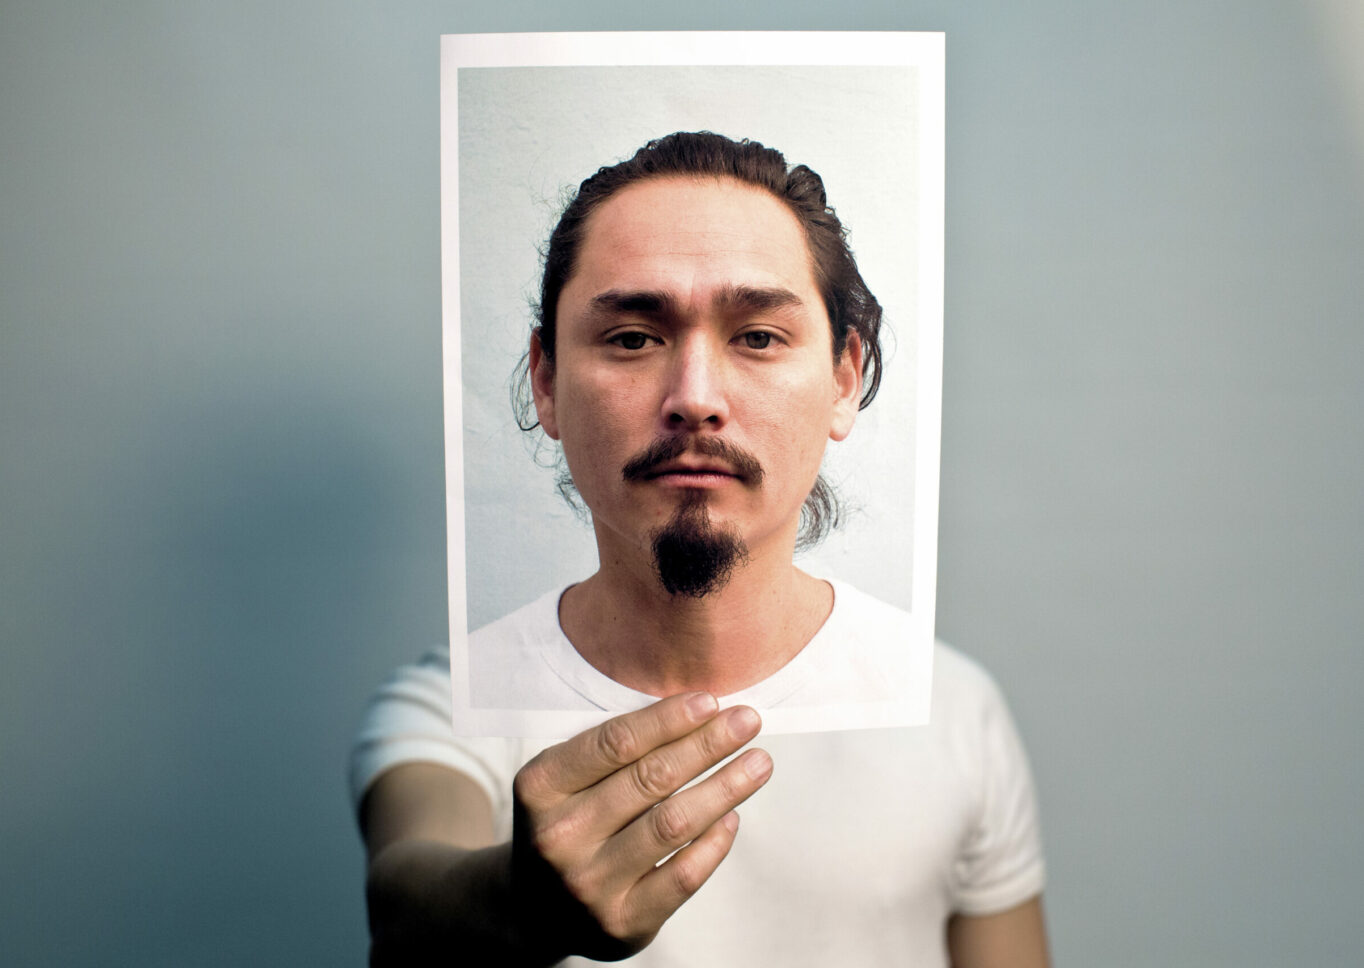 A man in a white t-shirt holds up a photograph of his face out in front where his head would be.